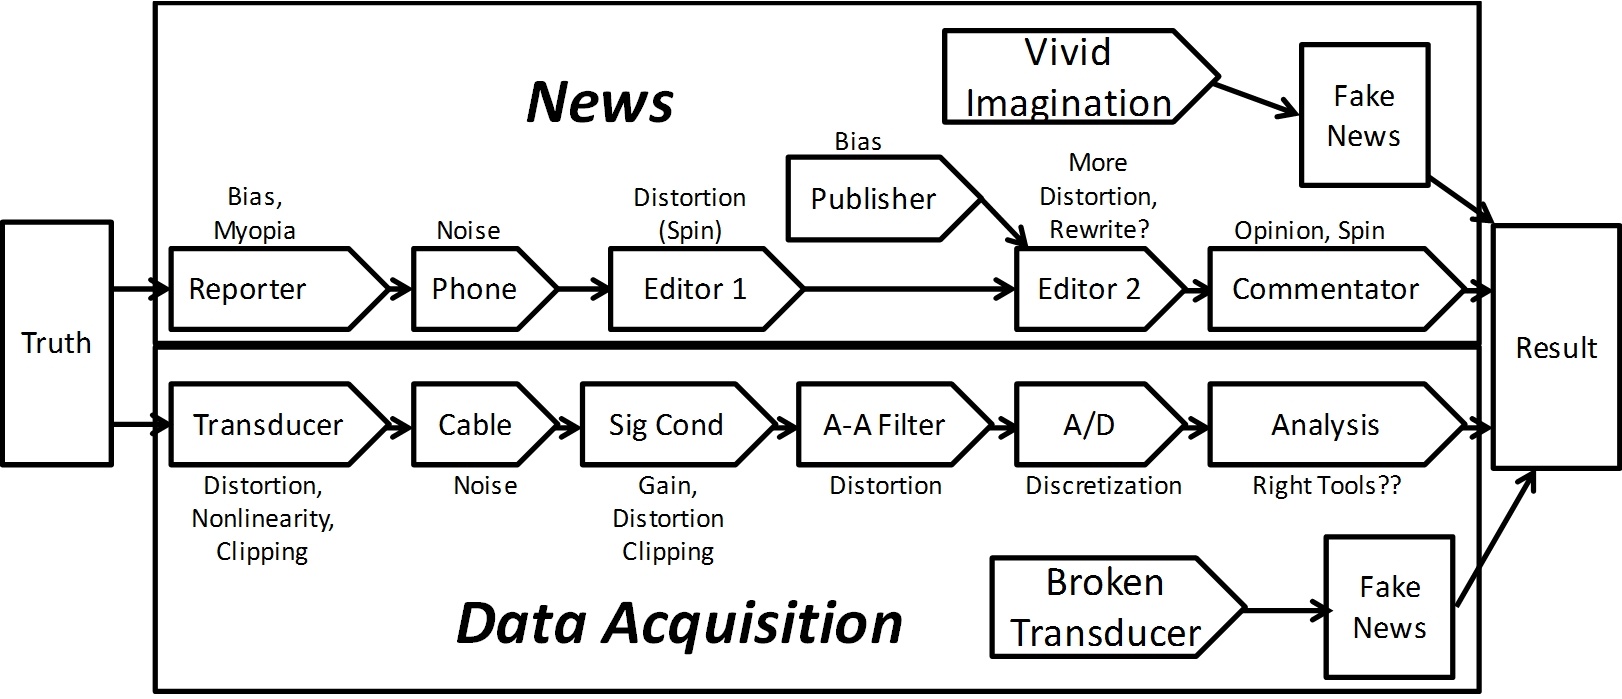 data-acquisition-news-distortion-analogy